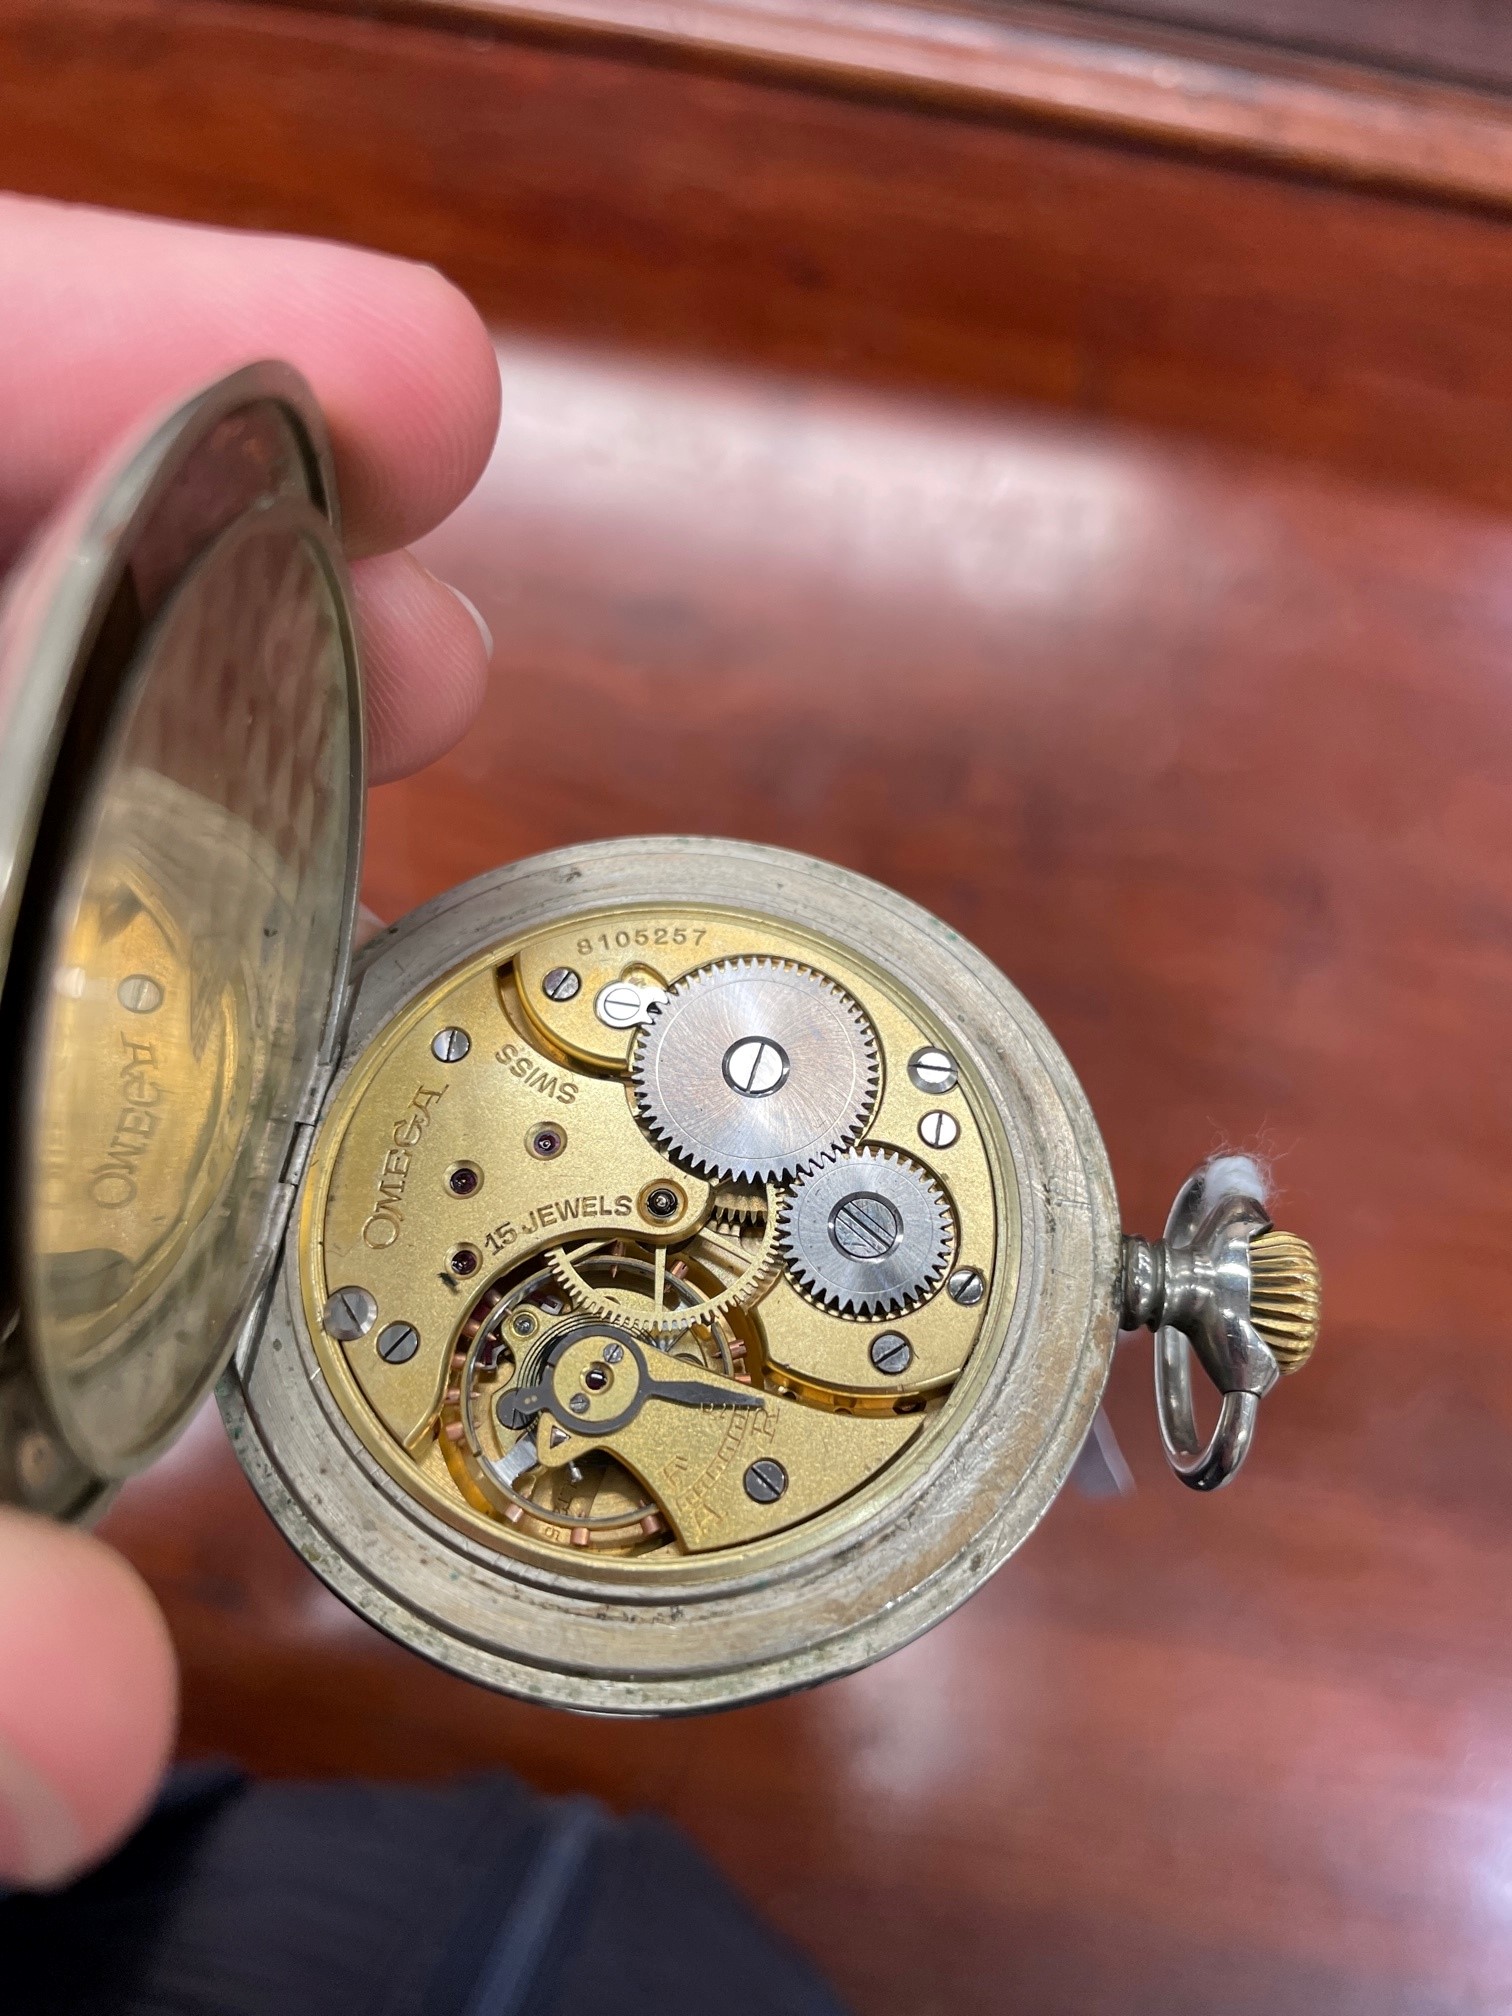 NICKEL PLATED OMEGA POCKET WATCH - Image 3 of 5